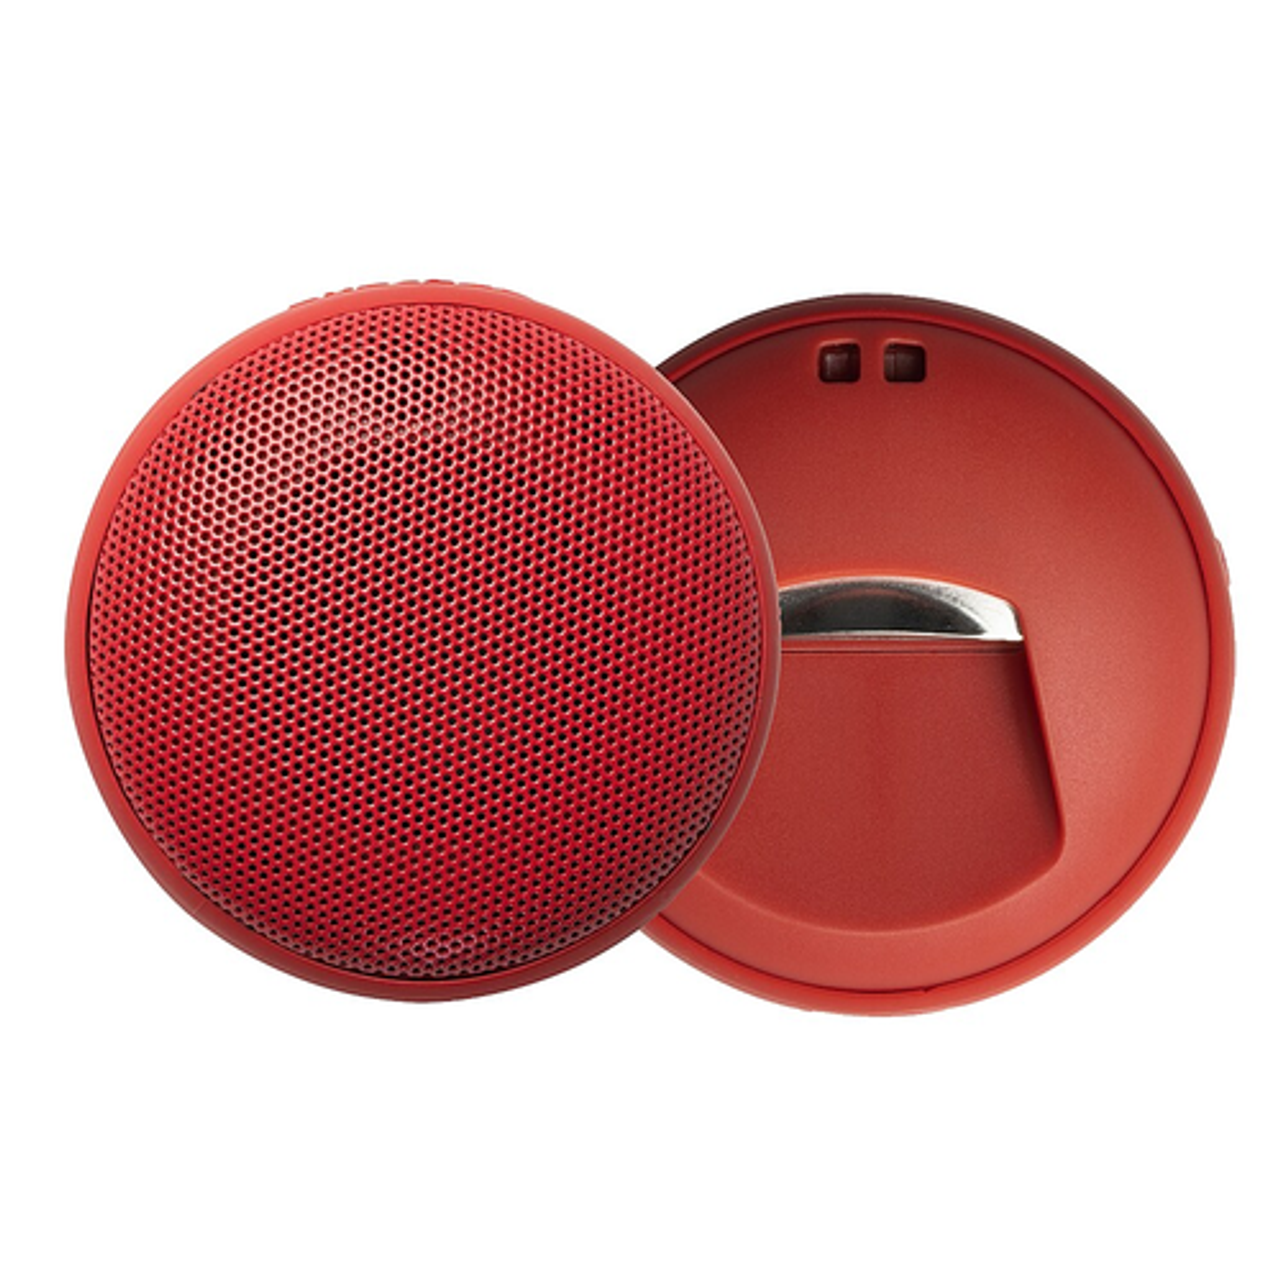 Speaqua Cruiser H2.0 Waterproof, Compact Bluetooth Speaker with Bottle Opener - Snapper Red - Snapper Red